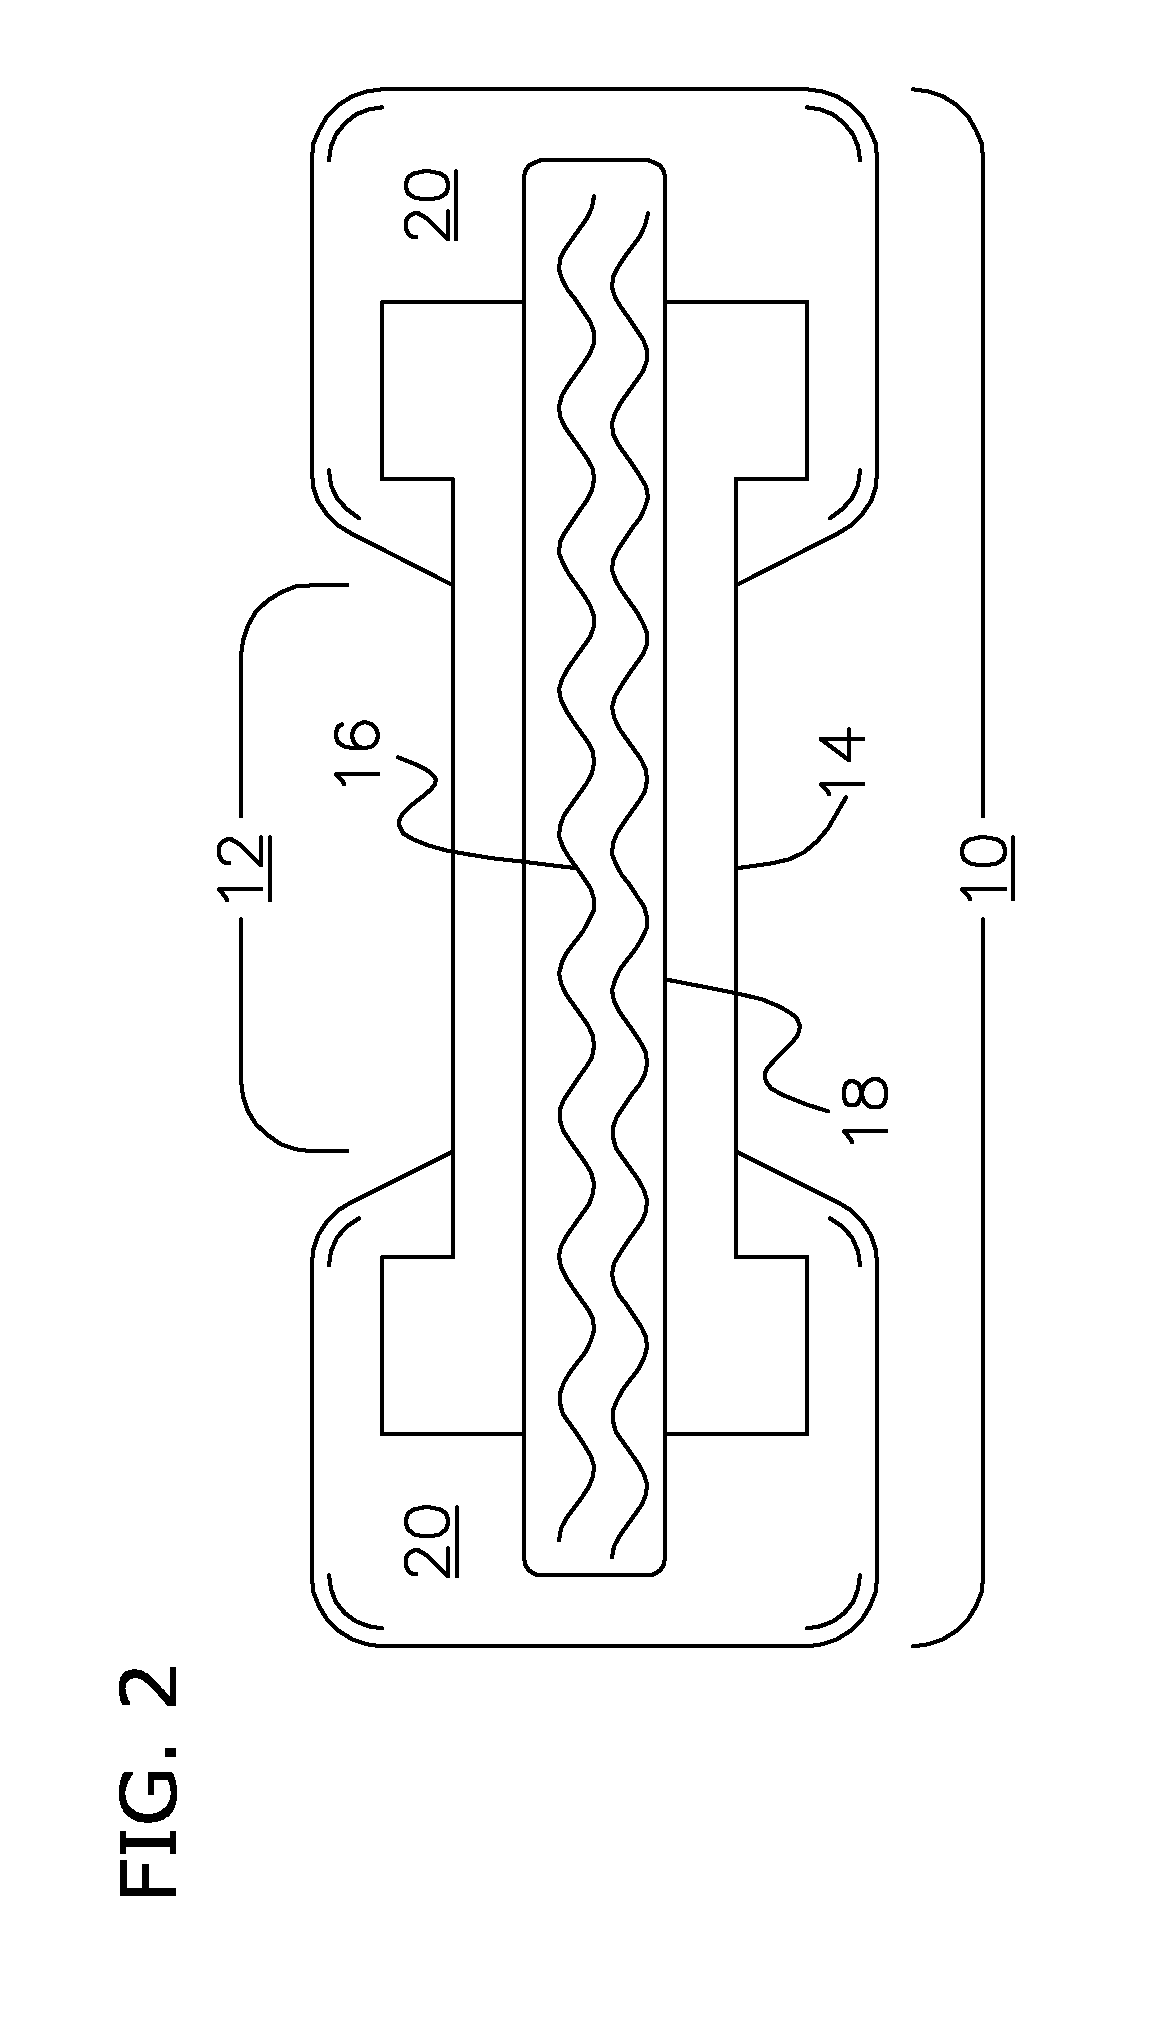 Mechanical implement utilizing active material actuation